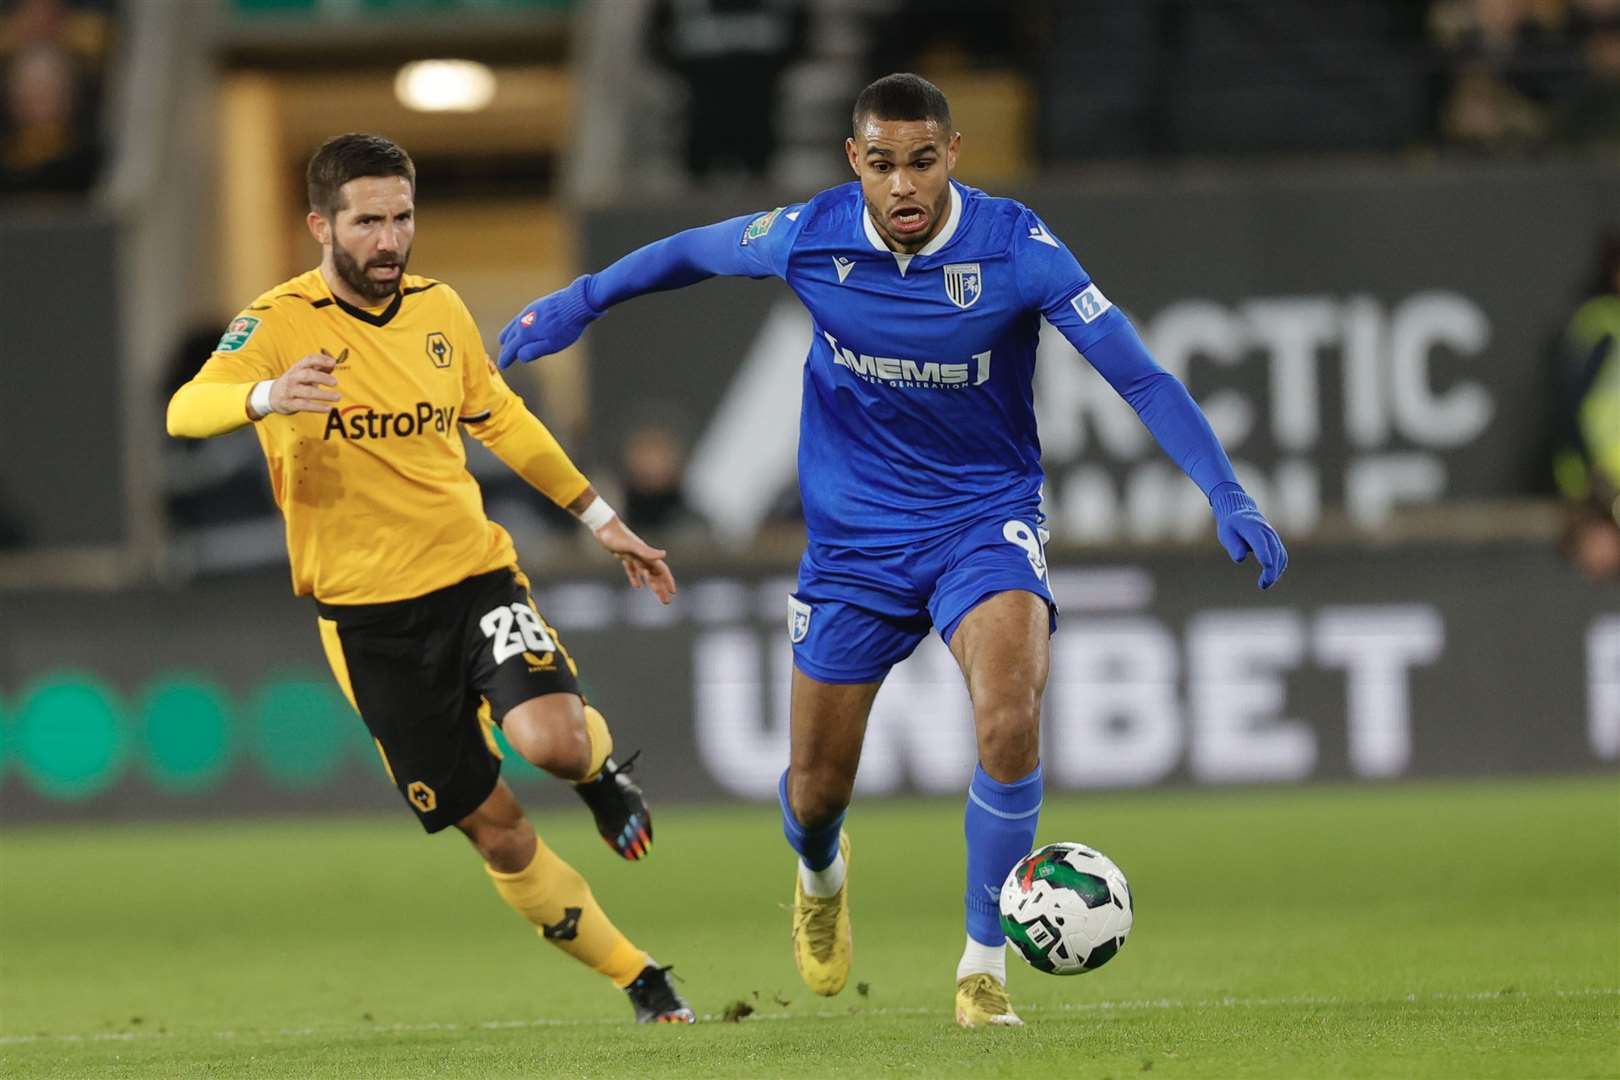 Mikael Mandron charges forward in attack for Gillingham